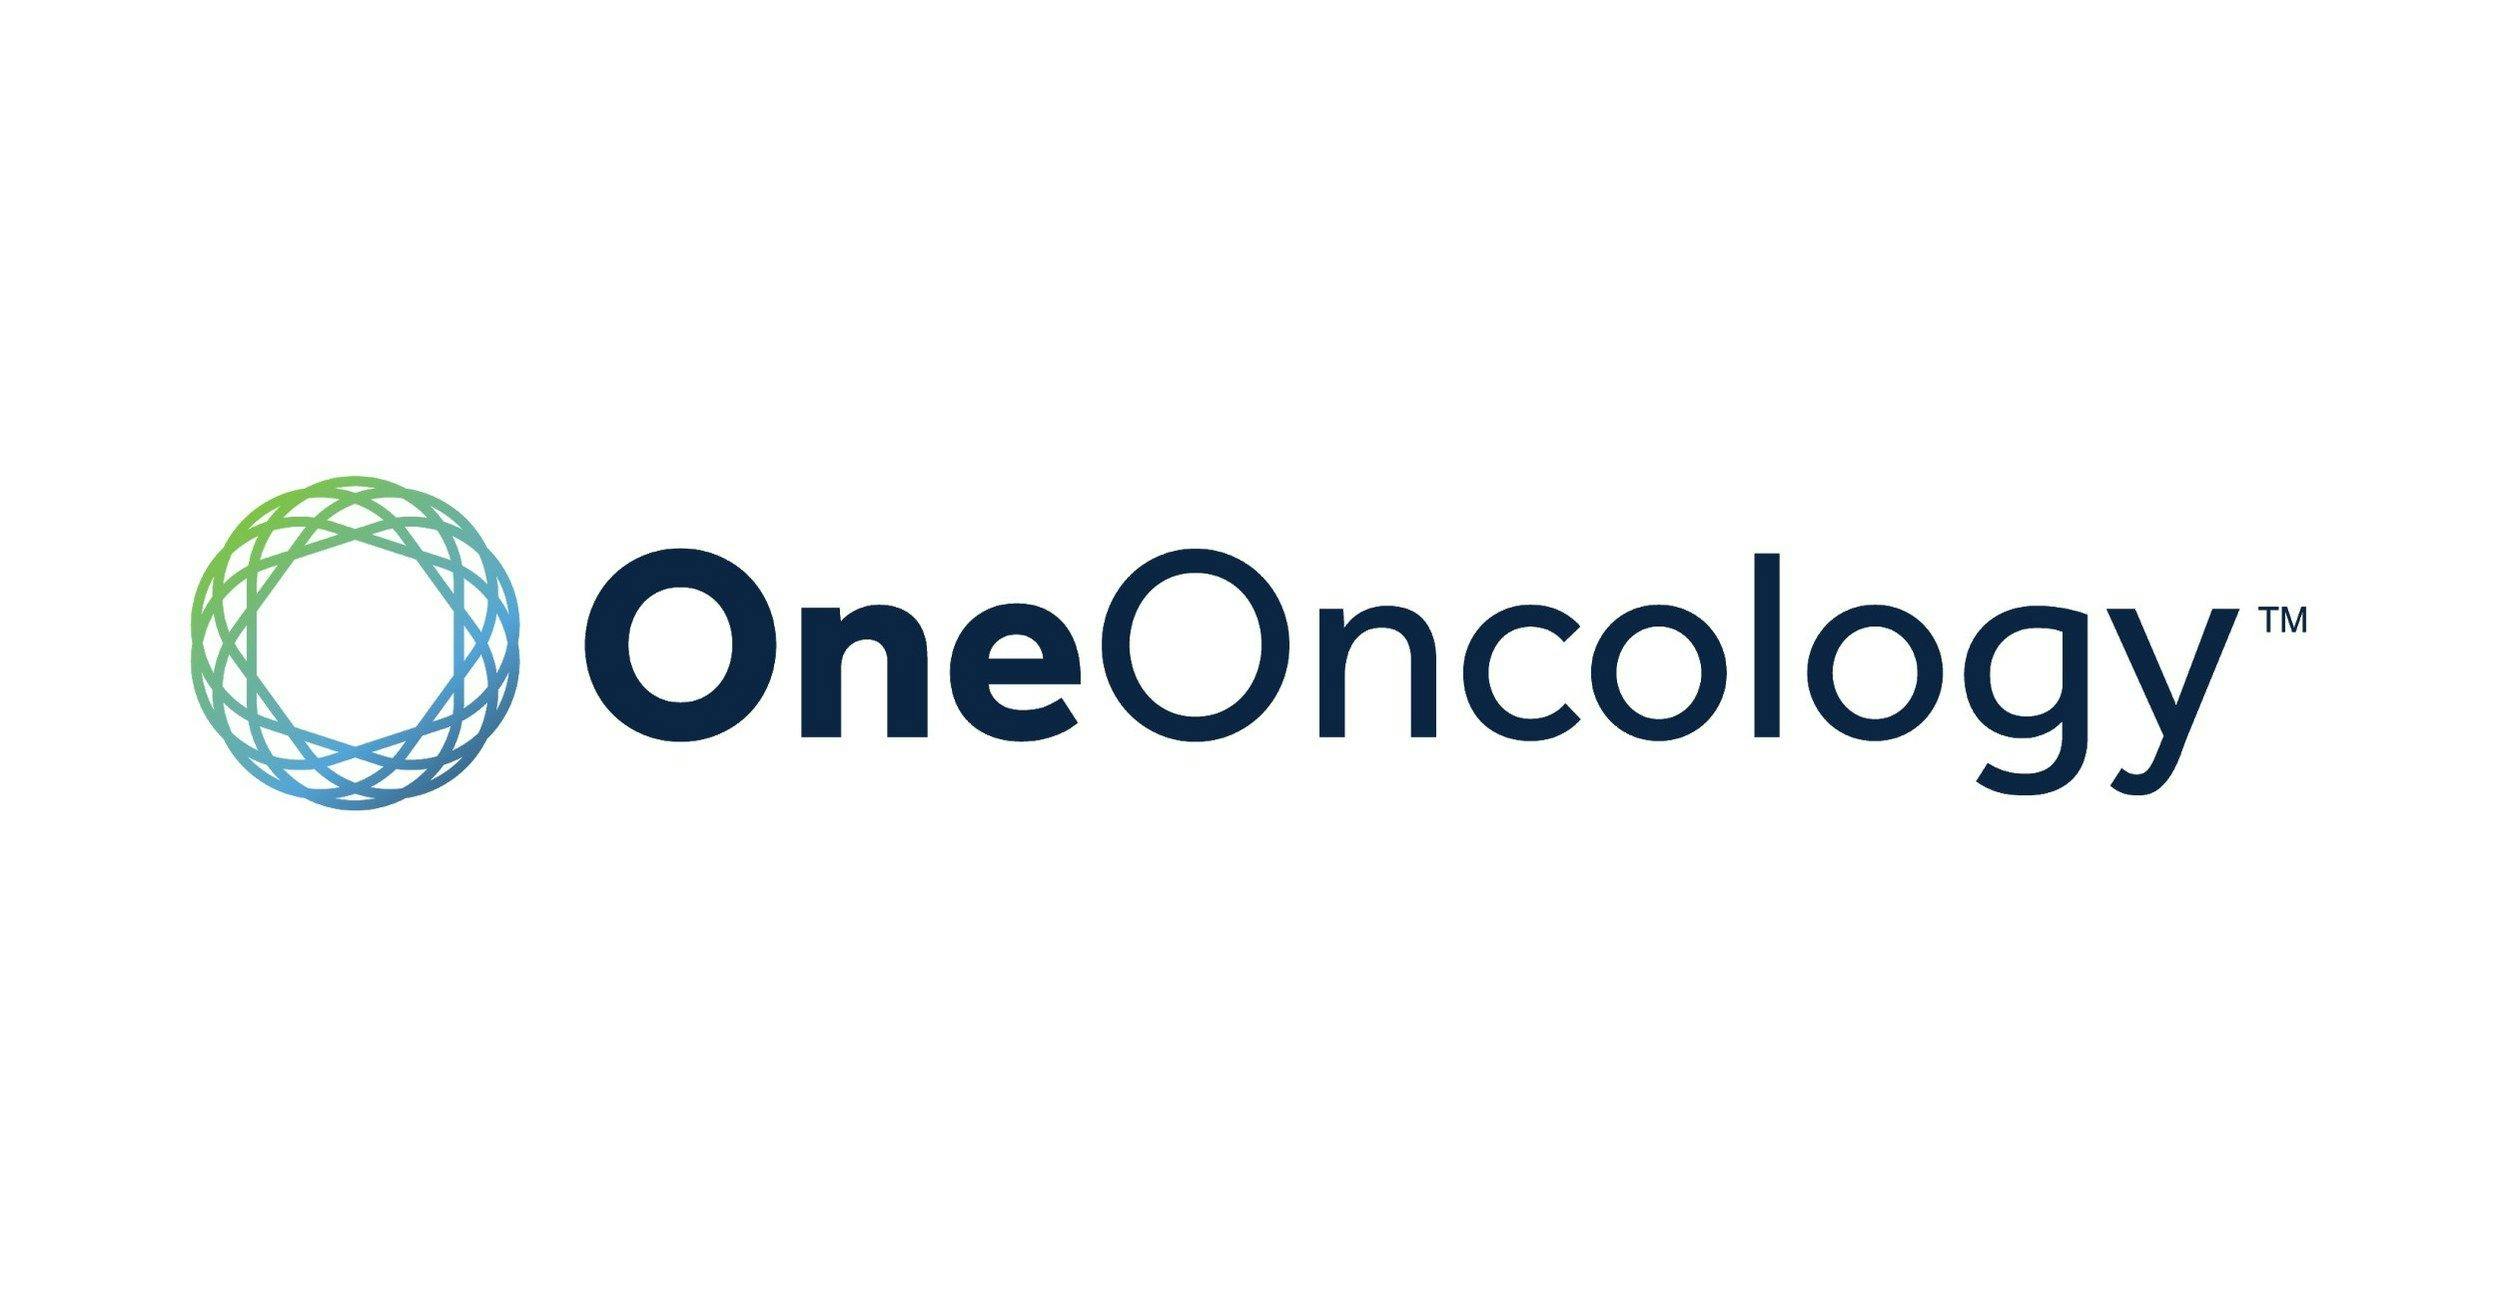 TPG, AmerisourceBergen Acquire OneOncology in Deal Valued at $2.1 Billion